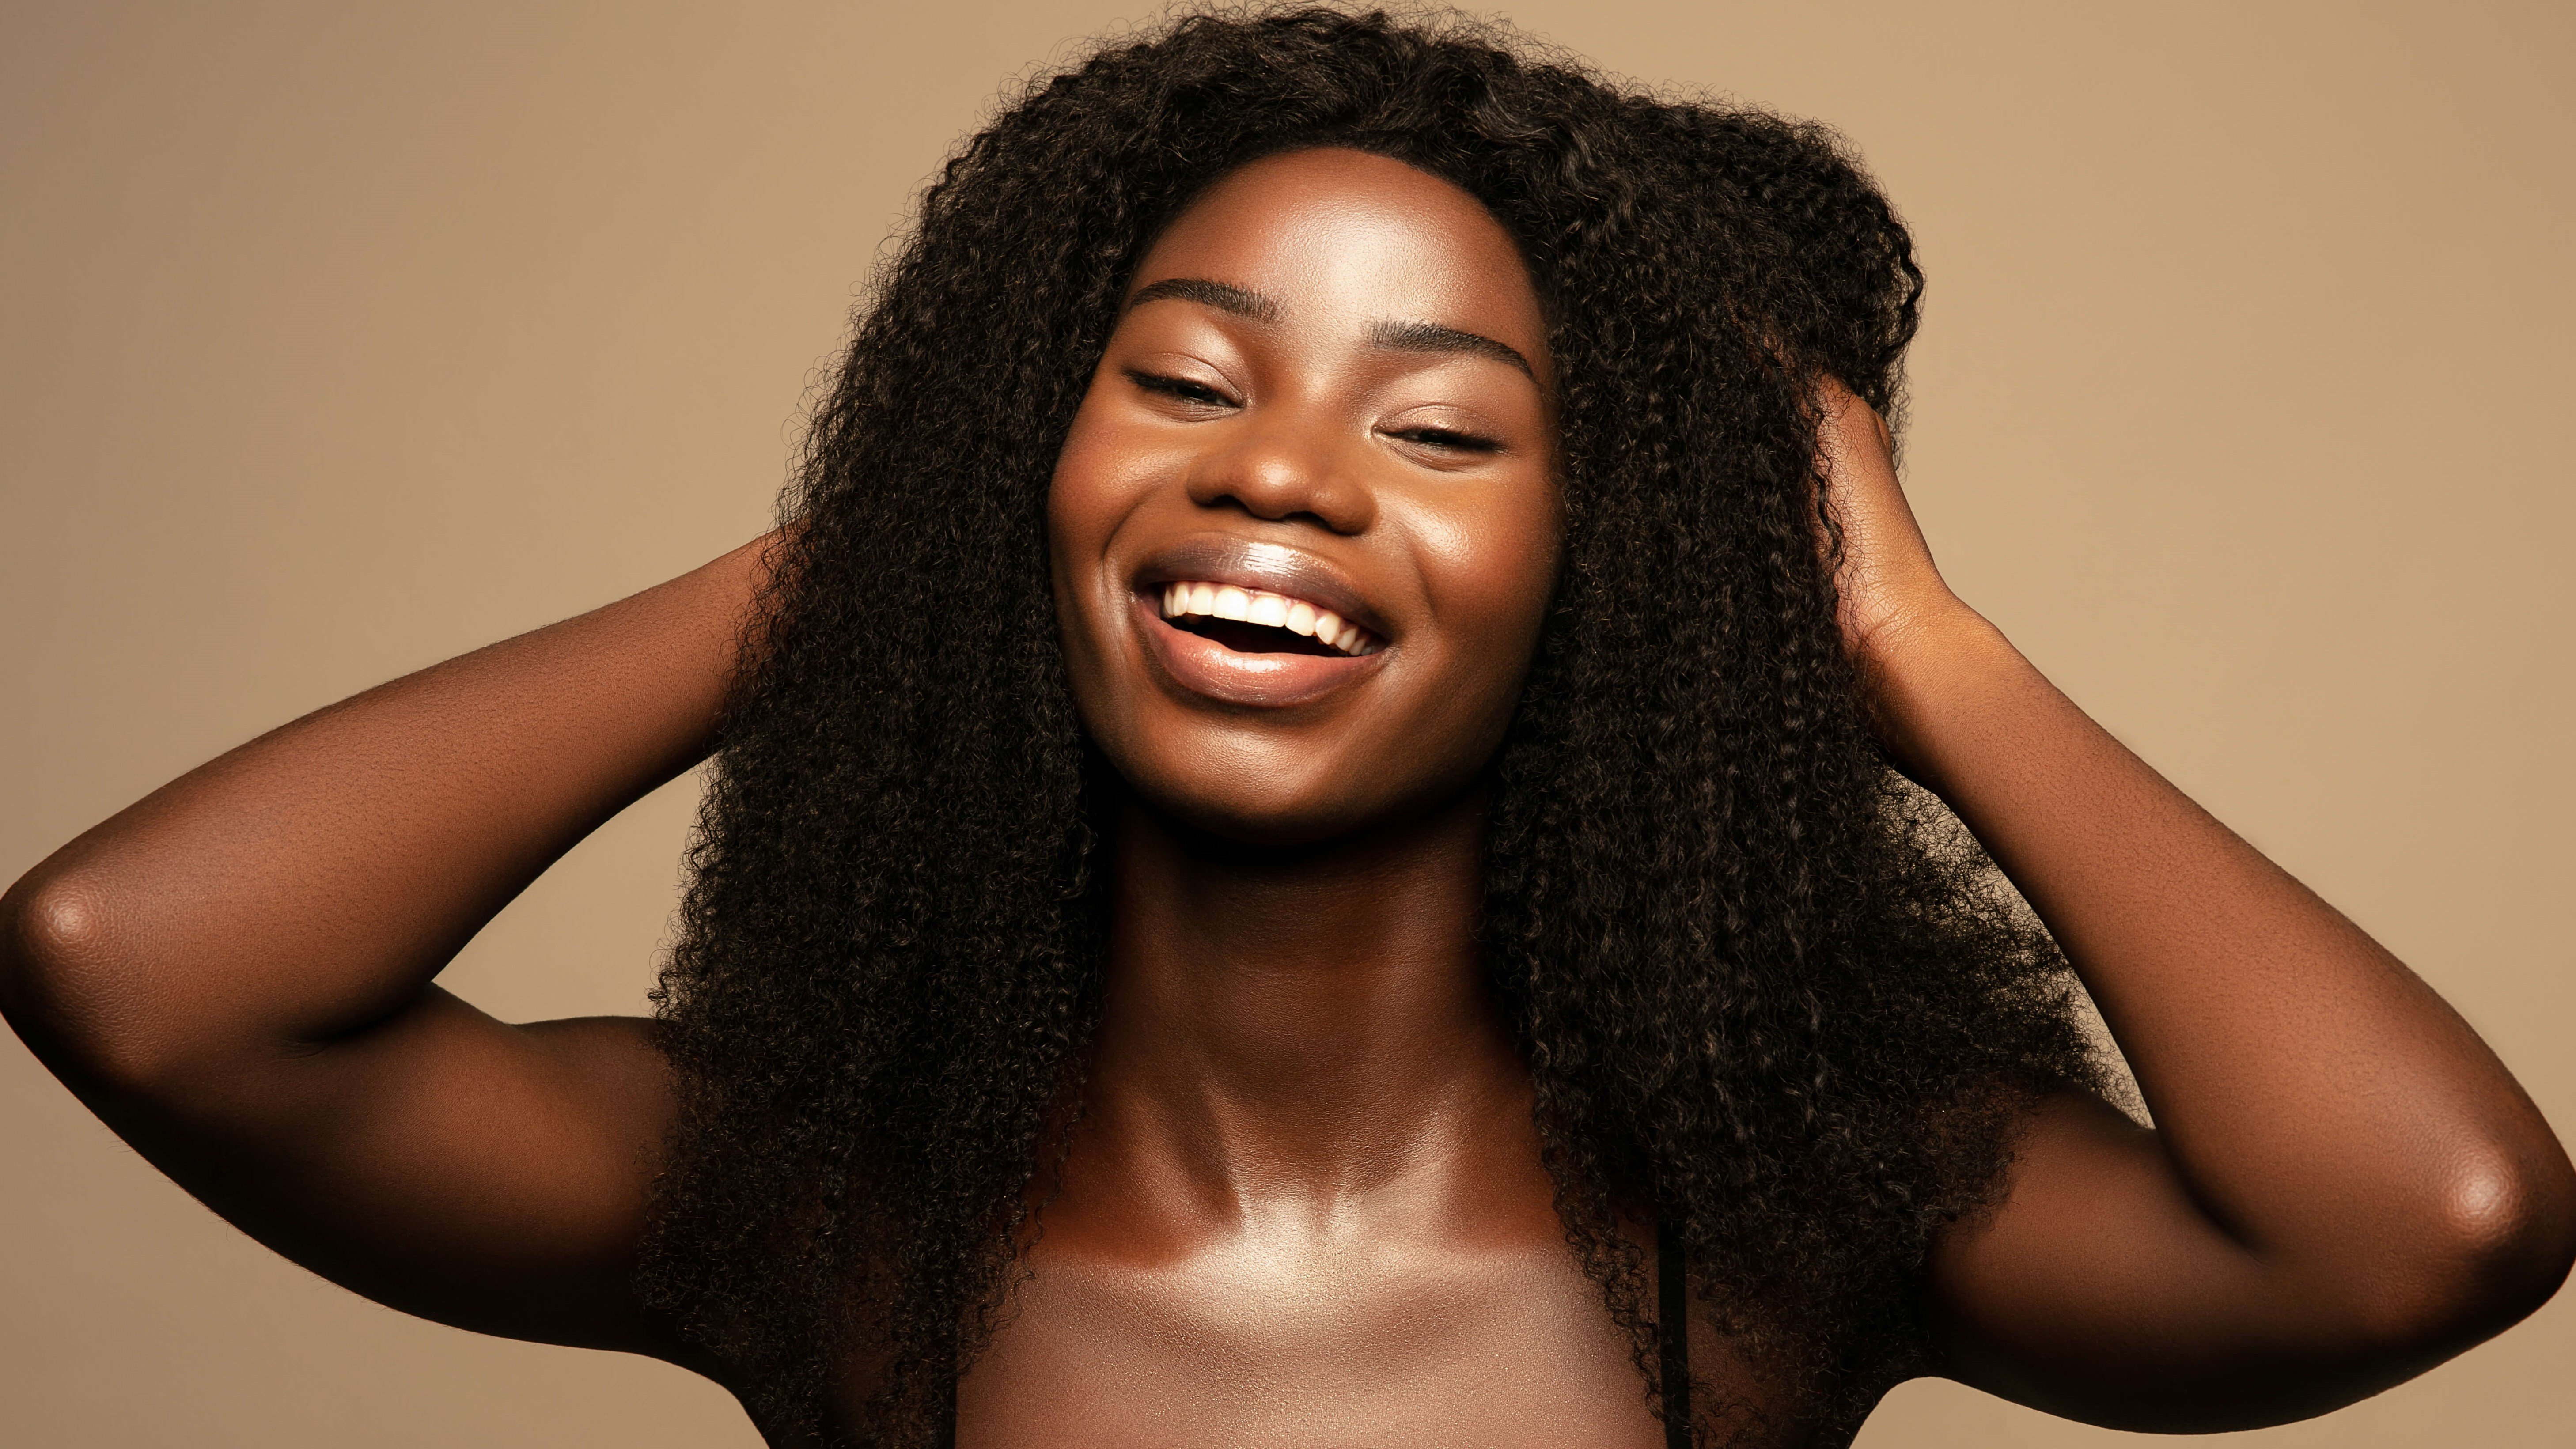 African American Hair and Caucasian Hair - What's The Difference?